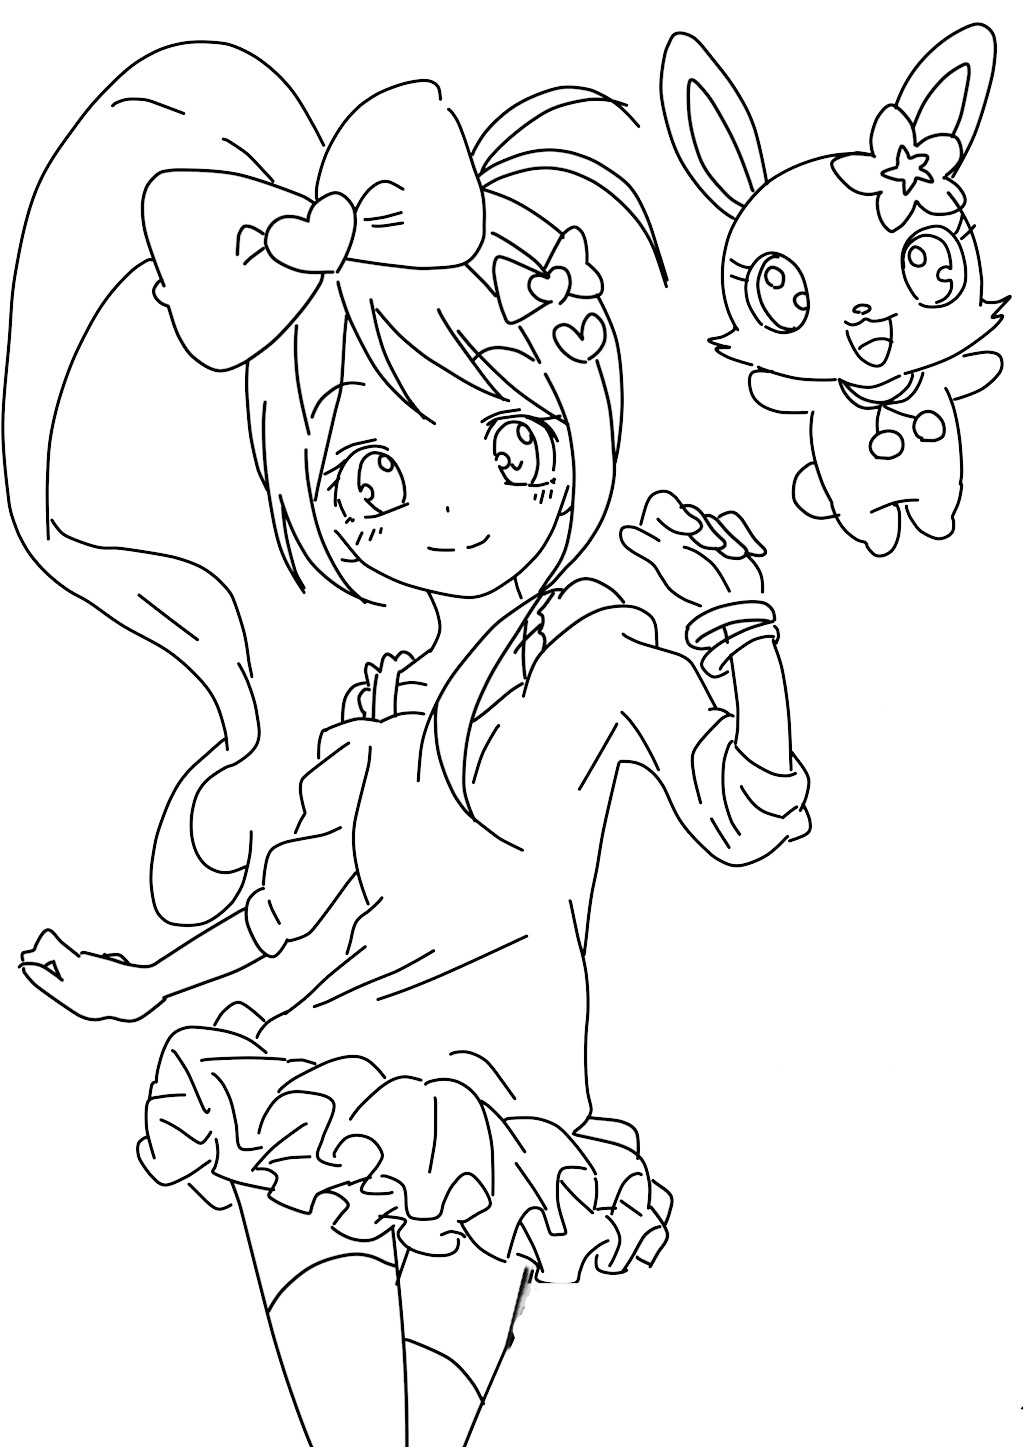 Jewelpet 38 Cartoons – Printable coloring pages